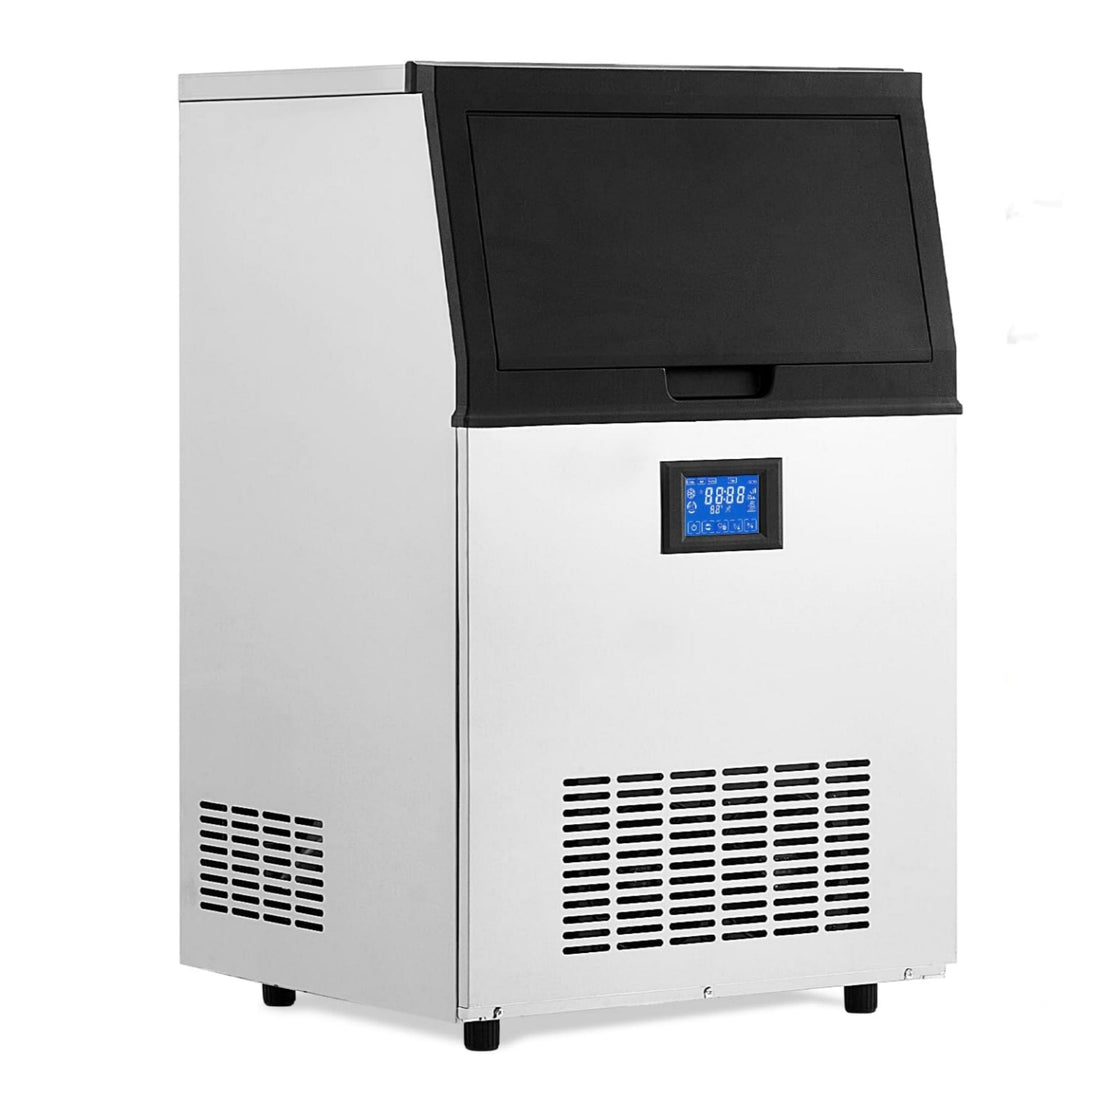 GARVEE 90LBS/24H, Commercial Ice Machine 110V Ice Machine with 33 LBS Storage Bin, Ideal for Restaurant, Home, Bars, Coffee Shop